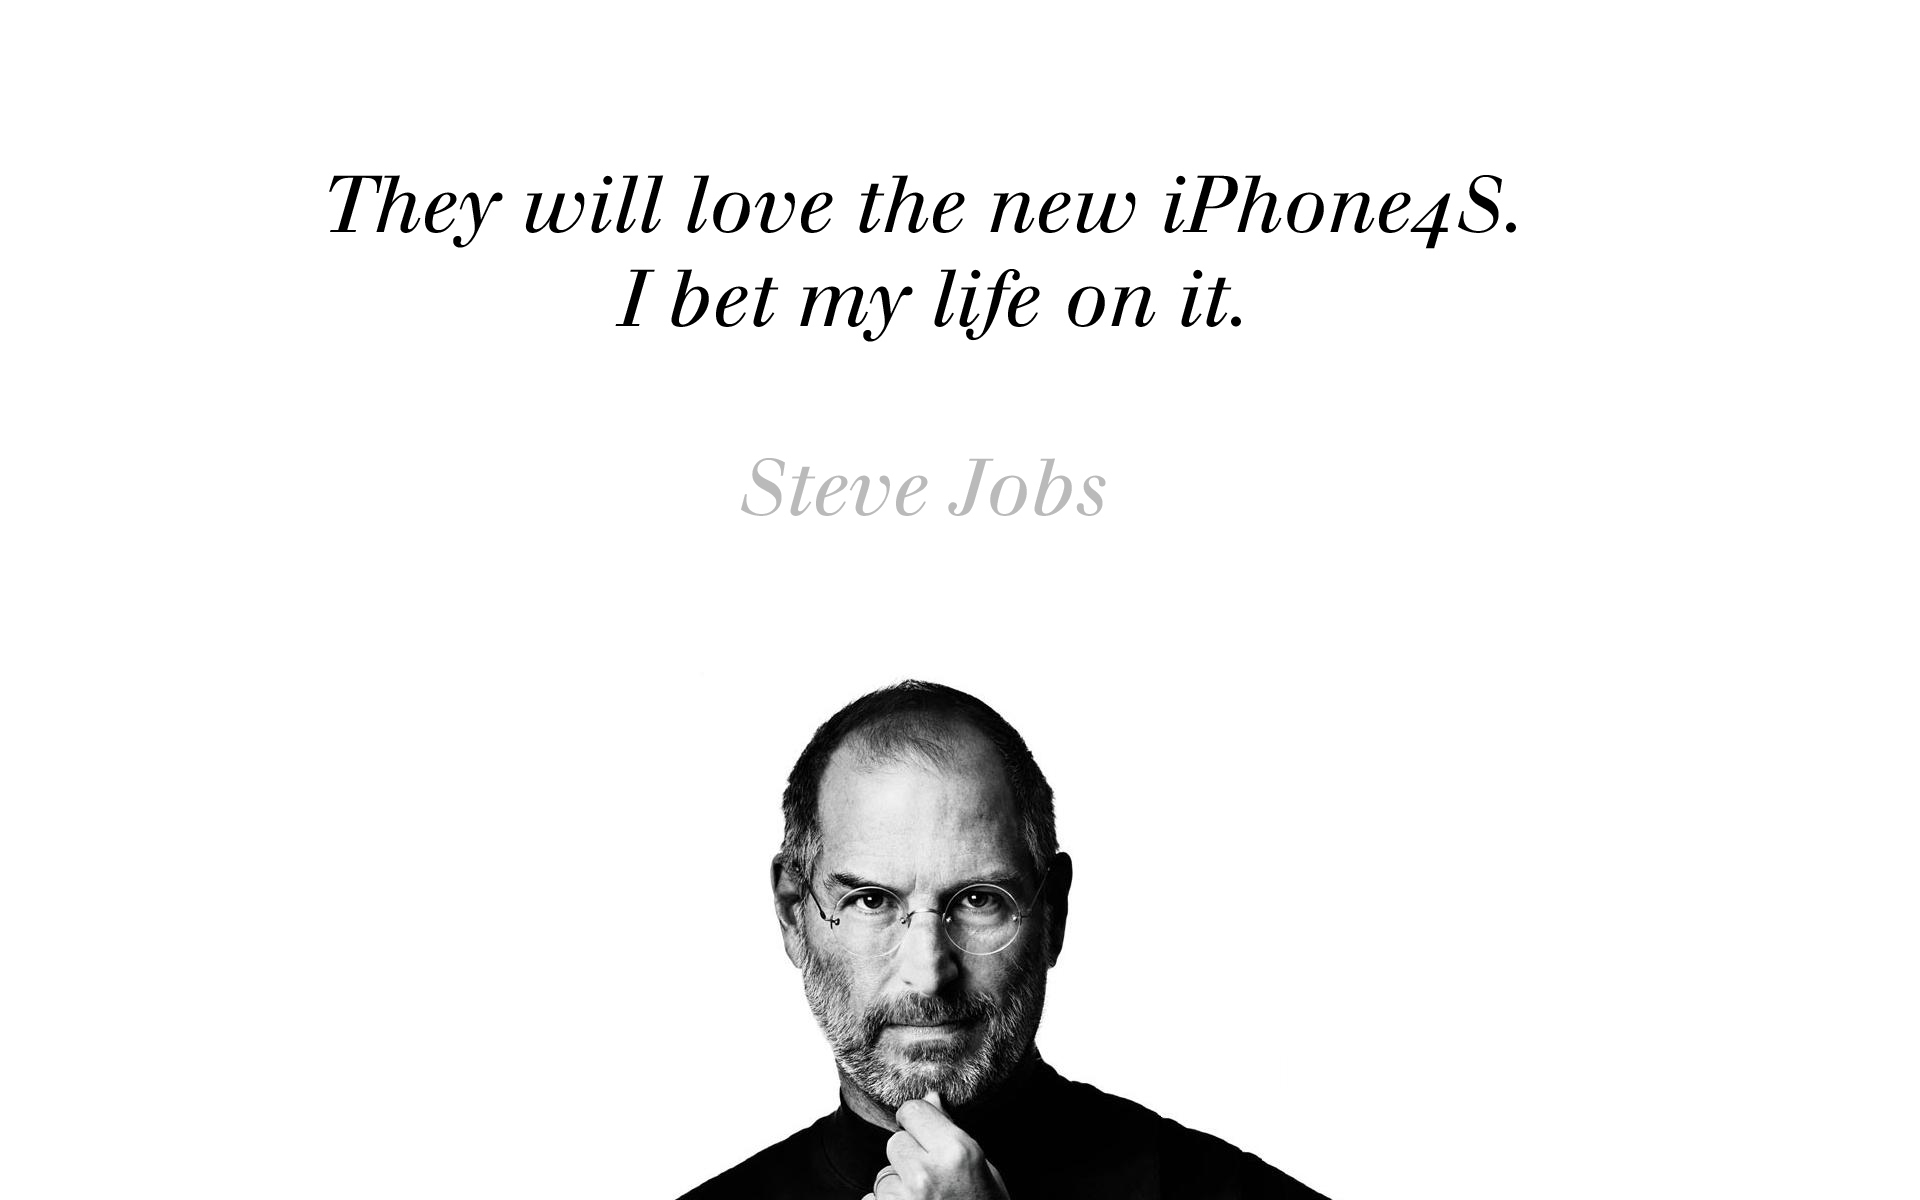 Steve Jobs about iPhone 4S for 1920 x 1200 widescreen resolution